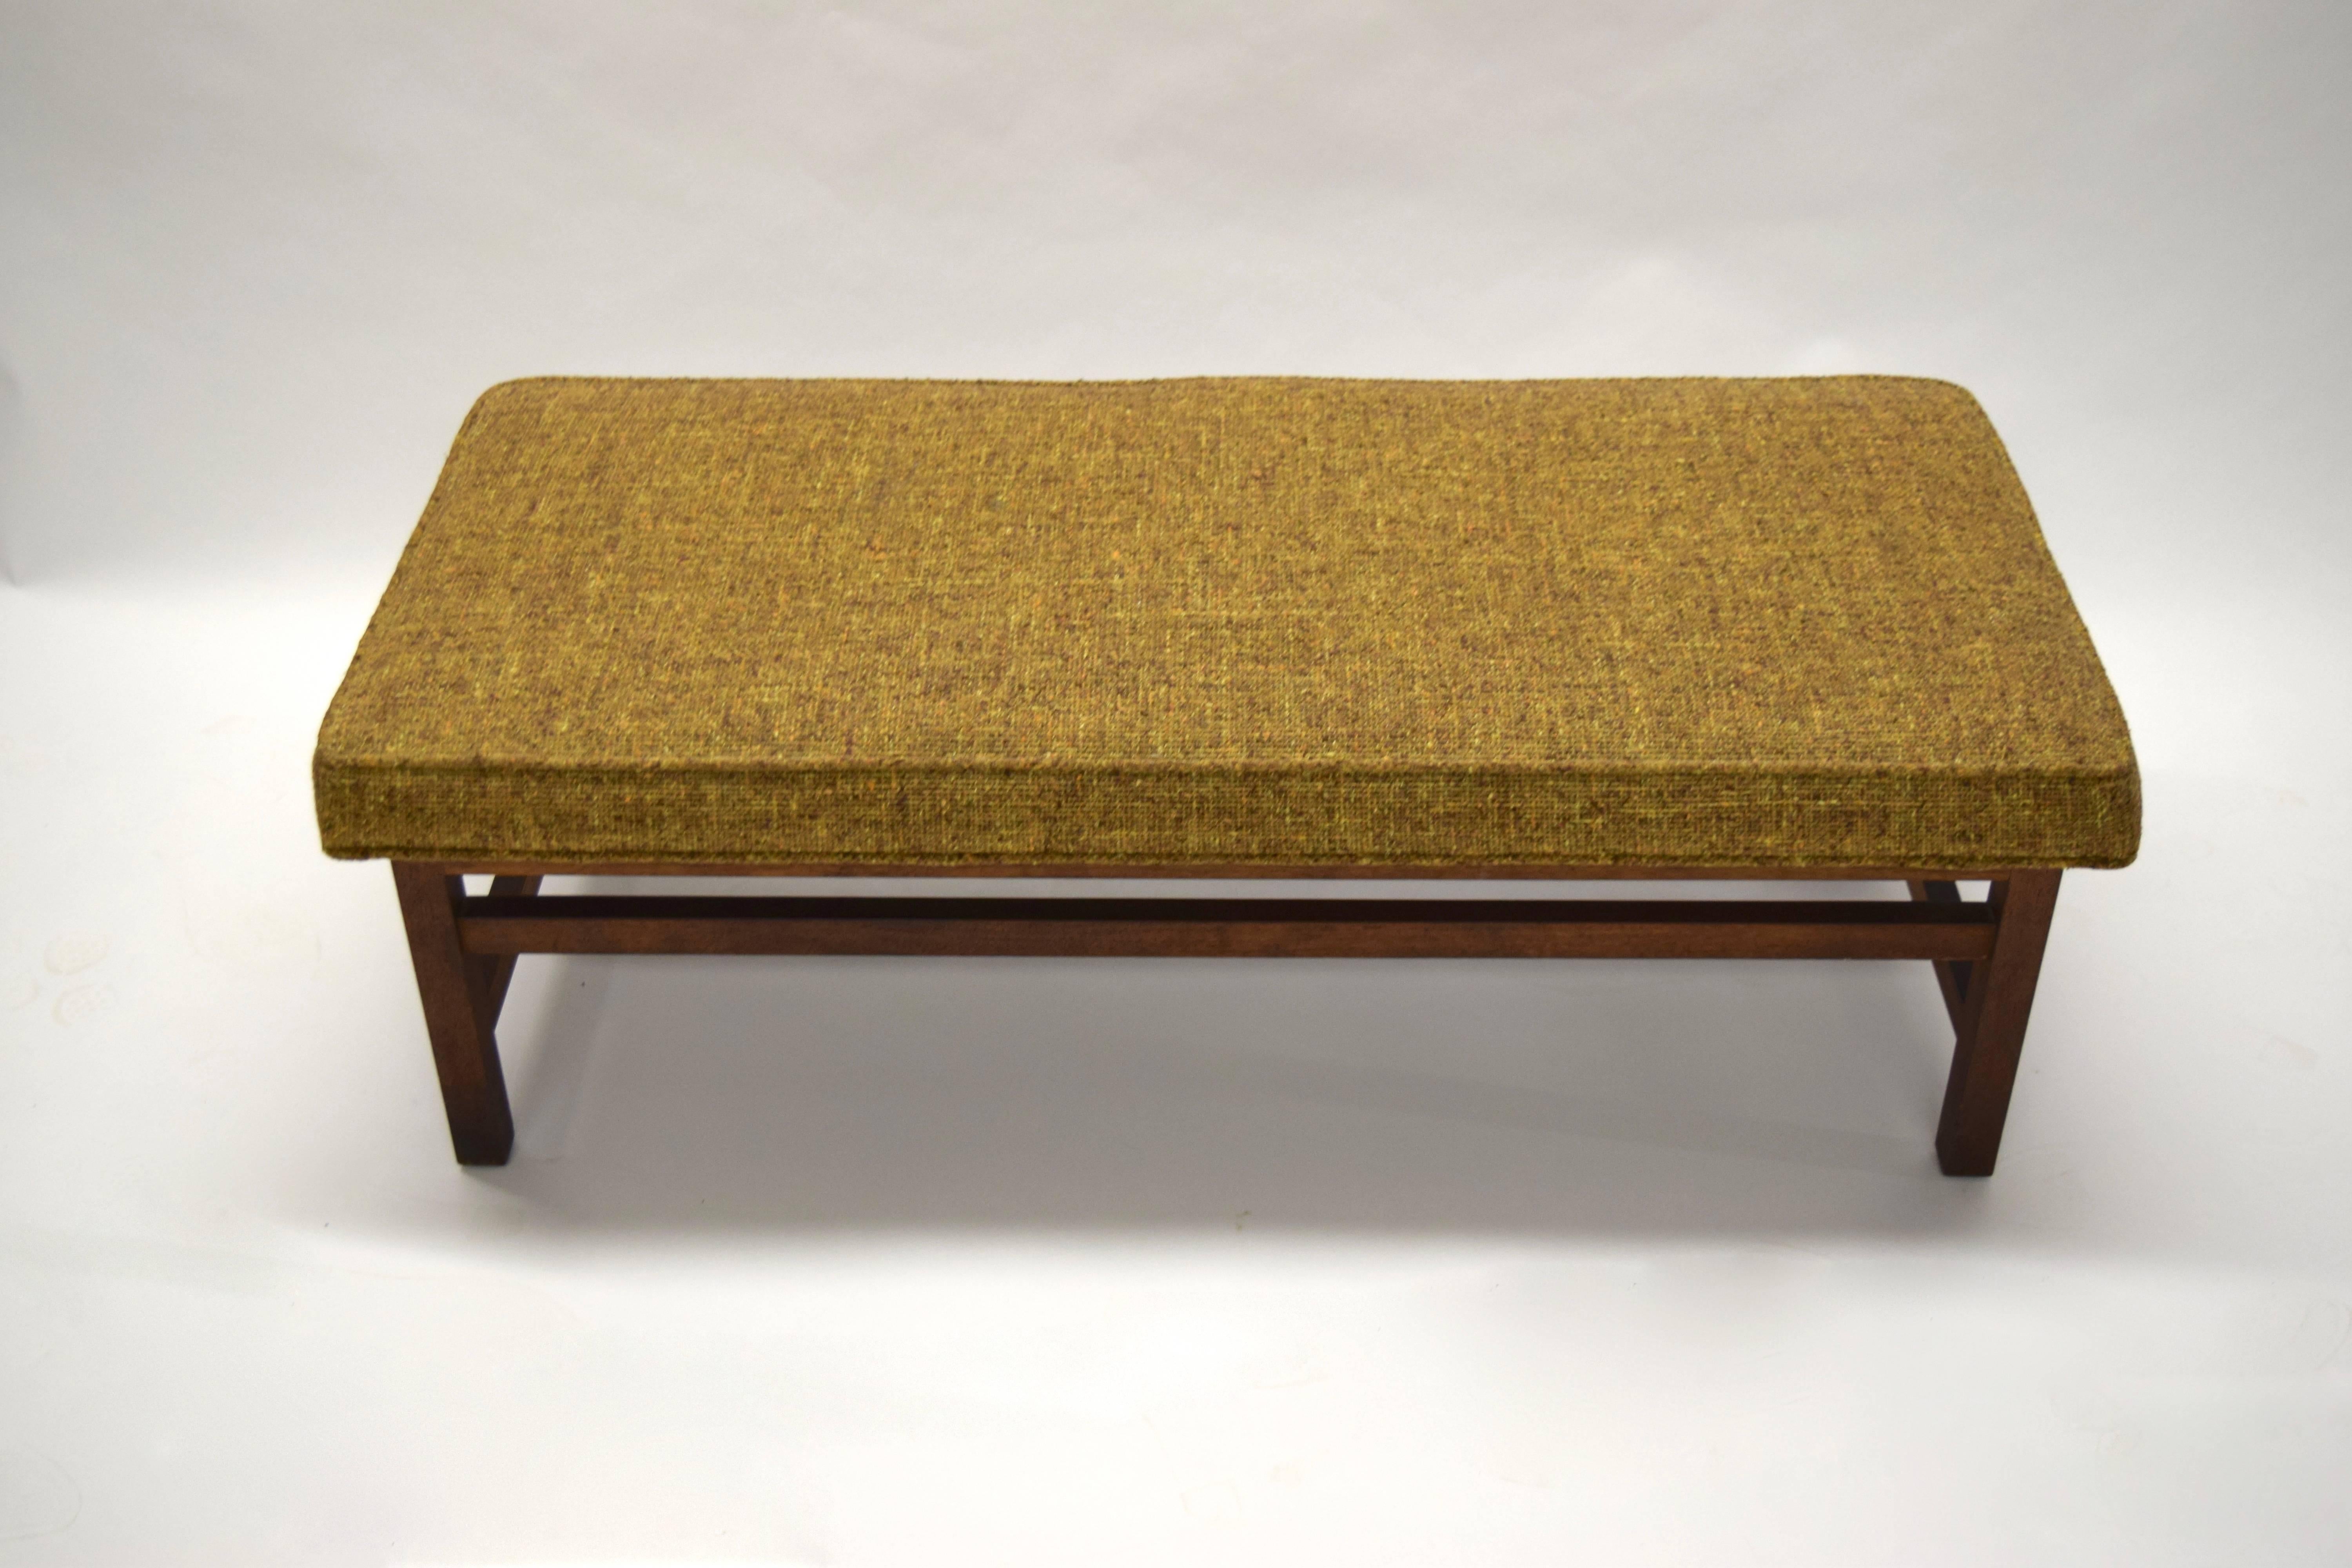 Bench in walnut with stretchers on all sides. At each end the stretchers are low close to the bottom and in front and back the stretchers are just below the seat. 
The seat has original fabric.